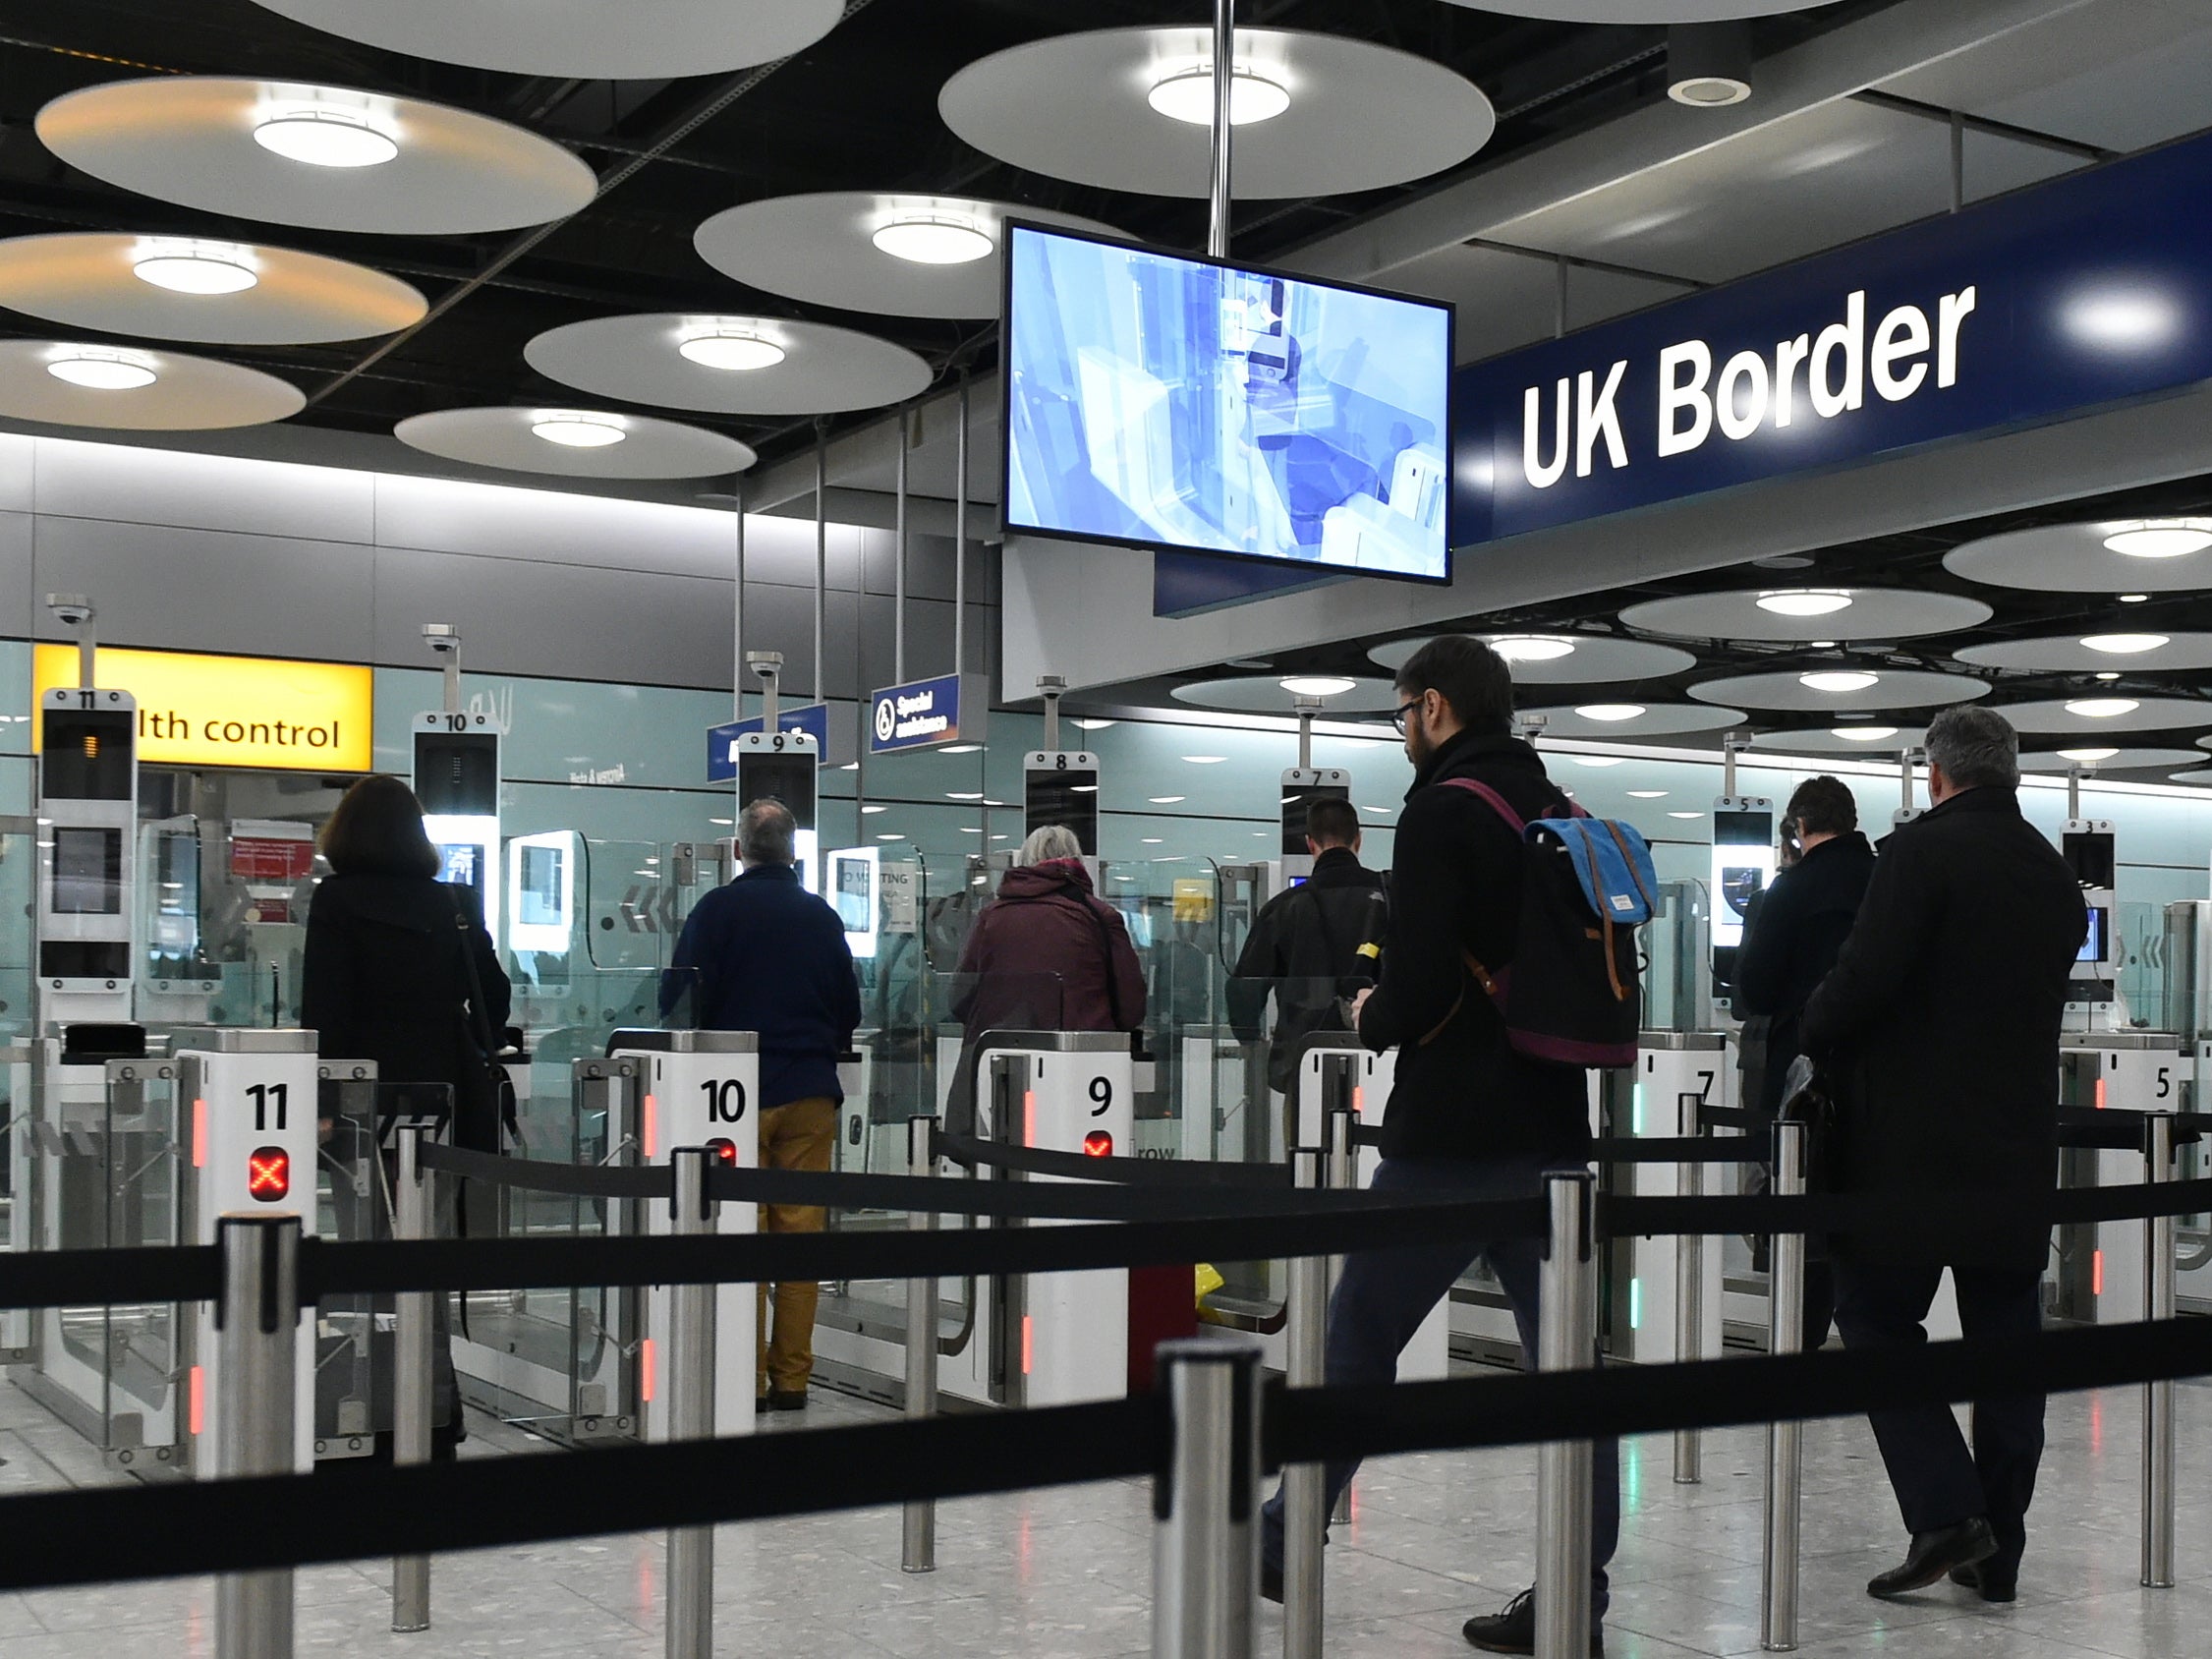 Heathrow airport is the busiest in the European Union by passenger traffic